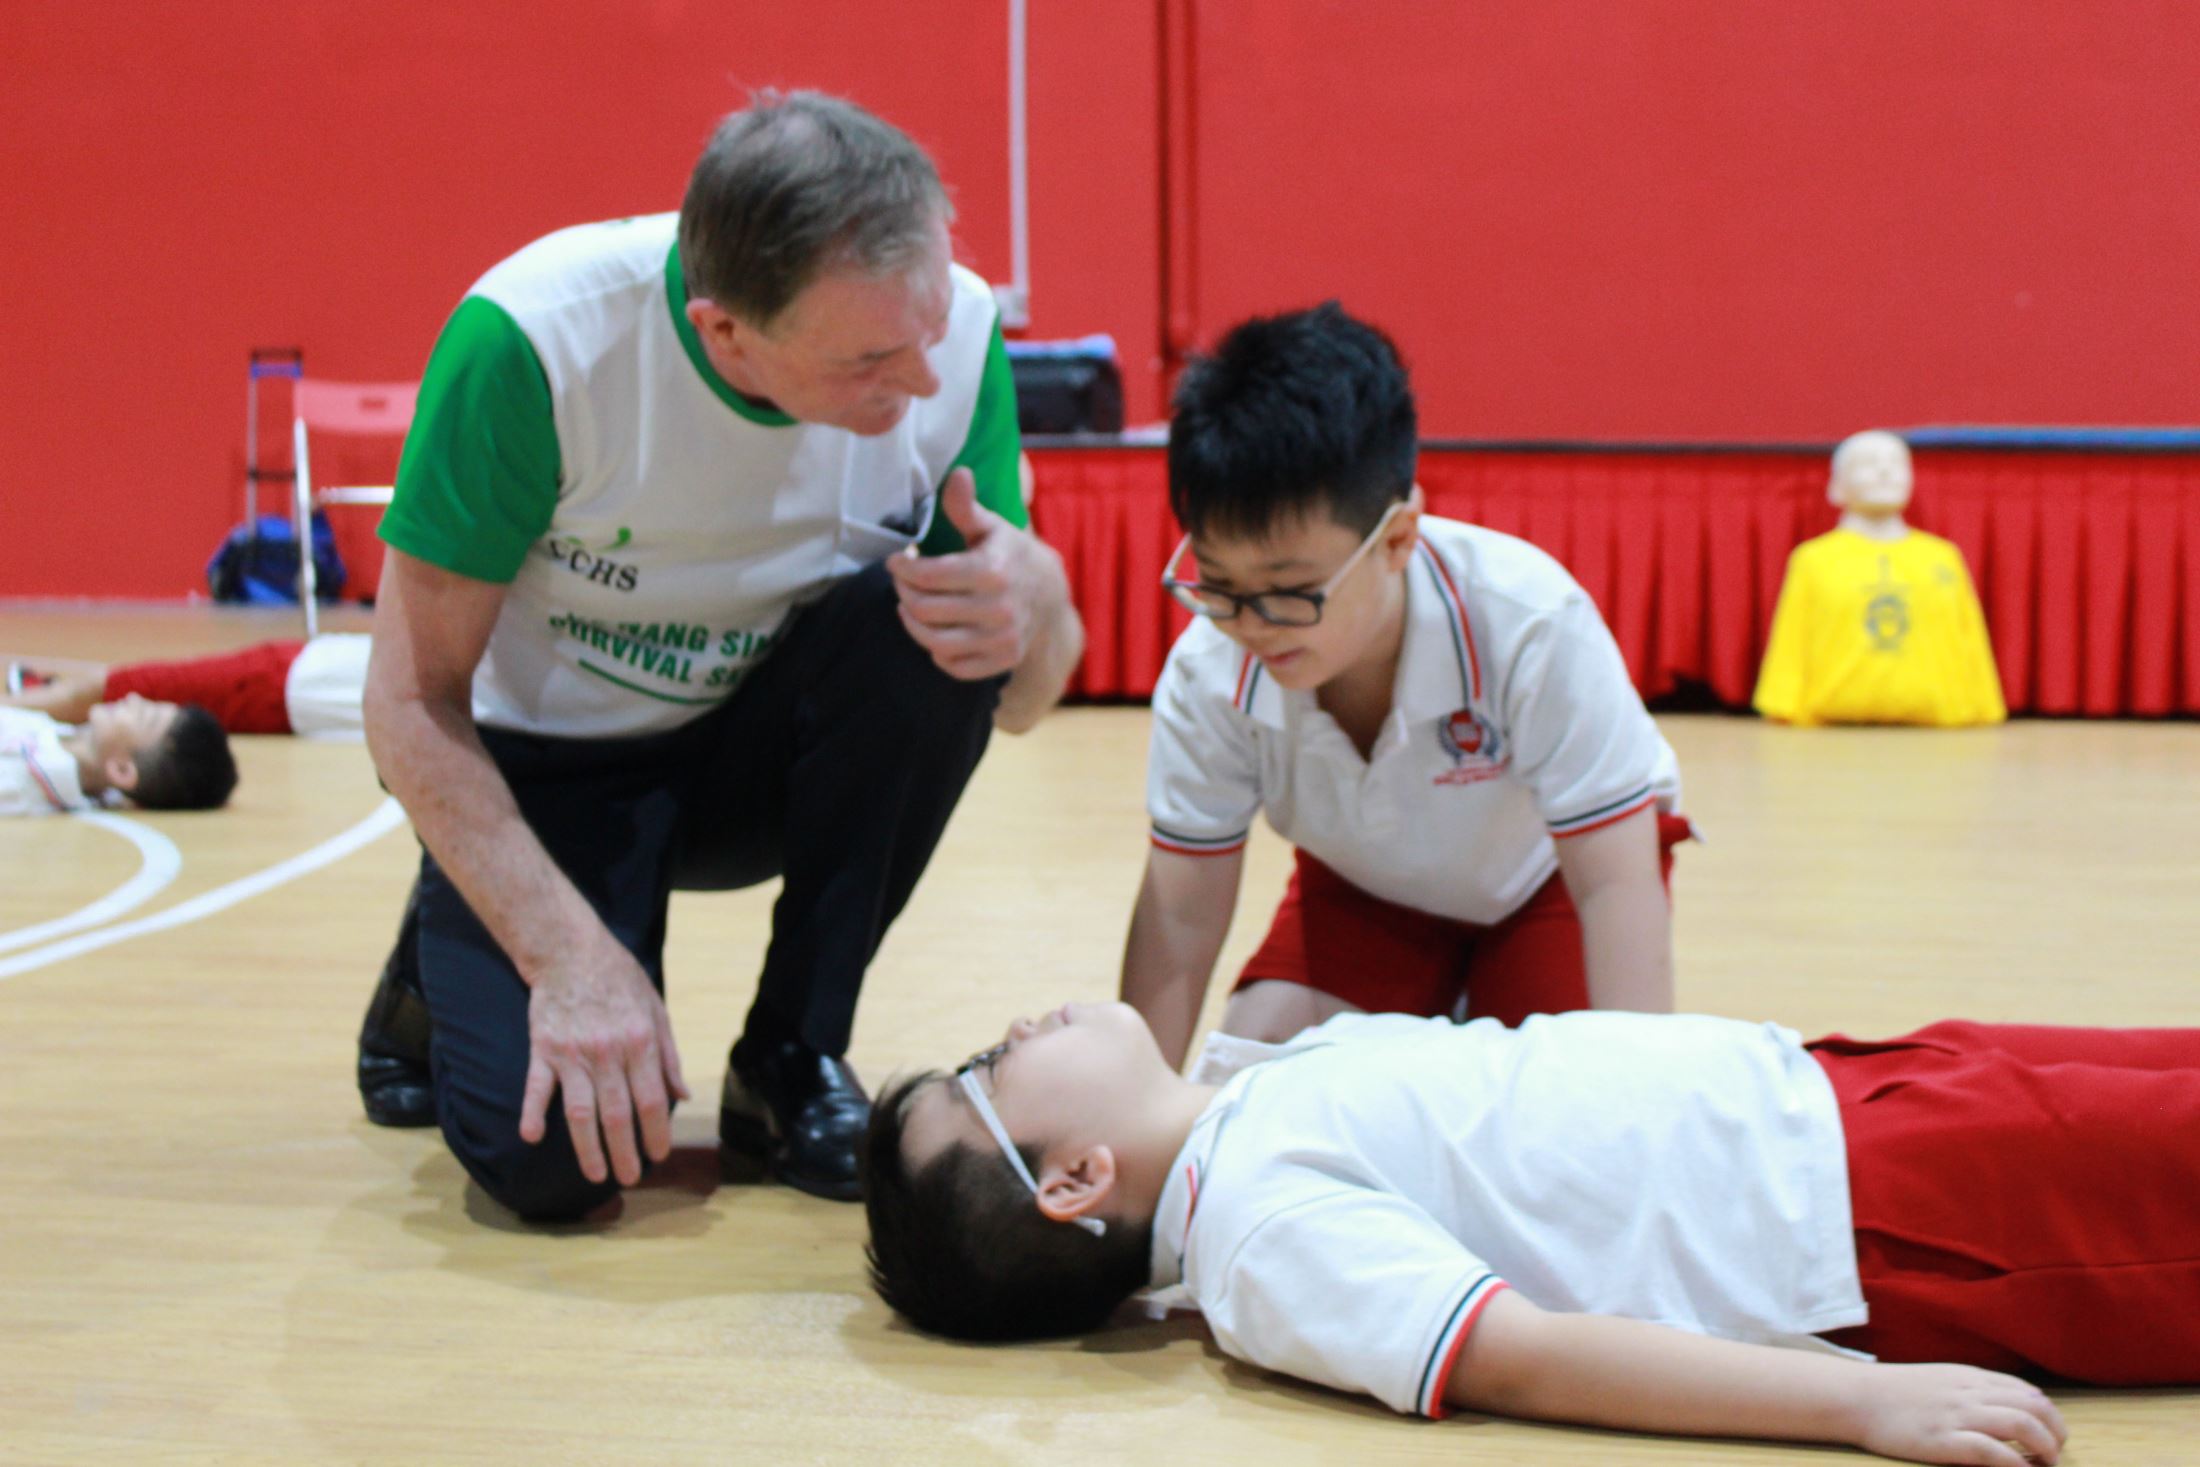 The first-aid steps were explicitly instructed by Mr. Tony Coffey